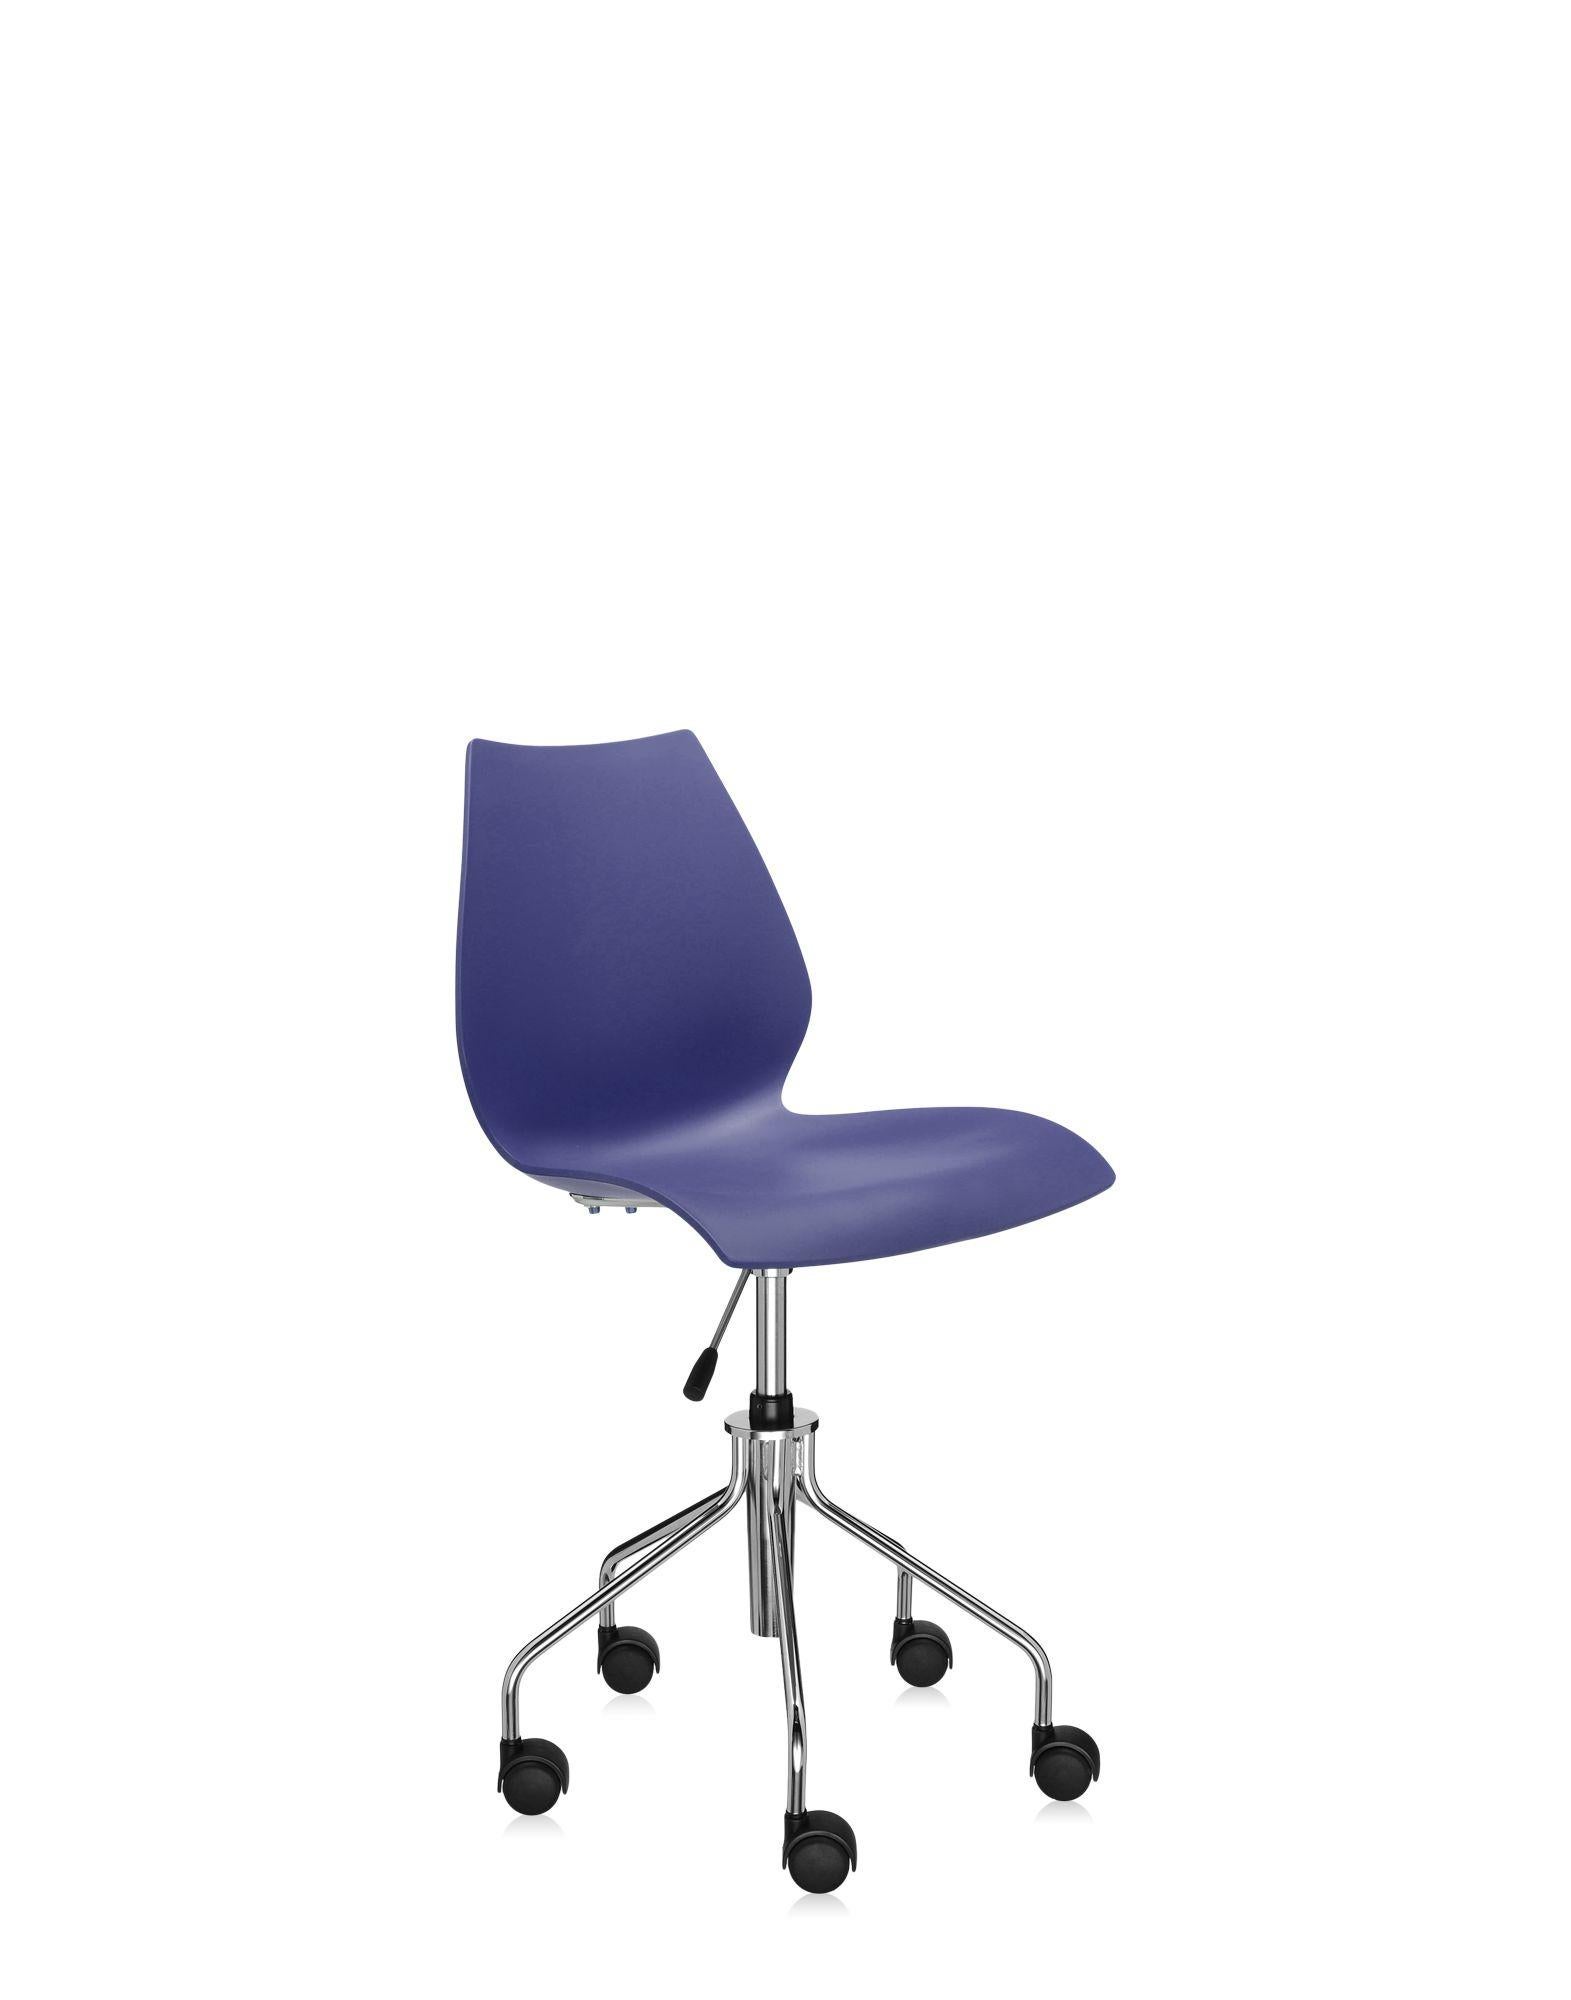 Contemporary Kartell Maui Swivel Chair Adjustable in Navy Blue by Vico Magistretti